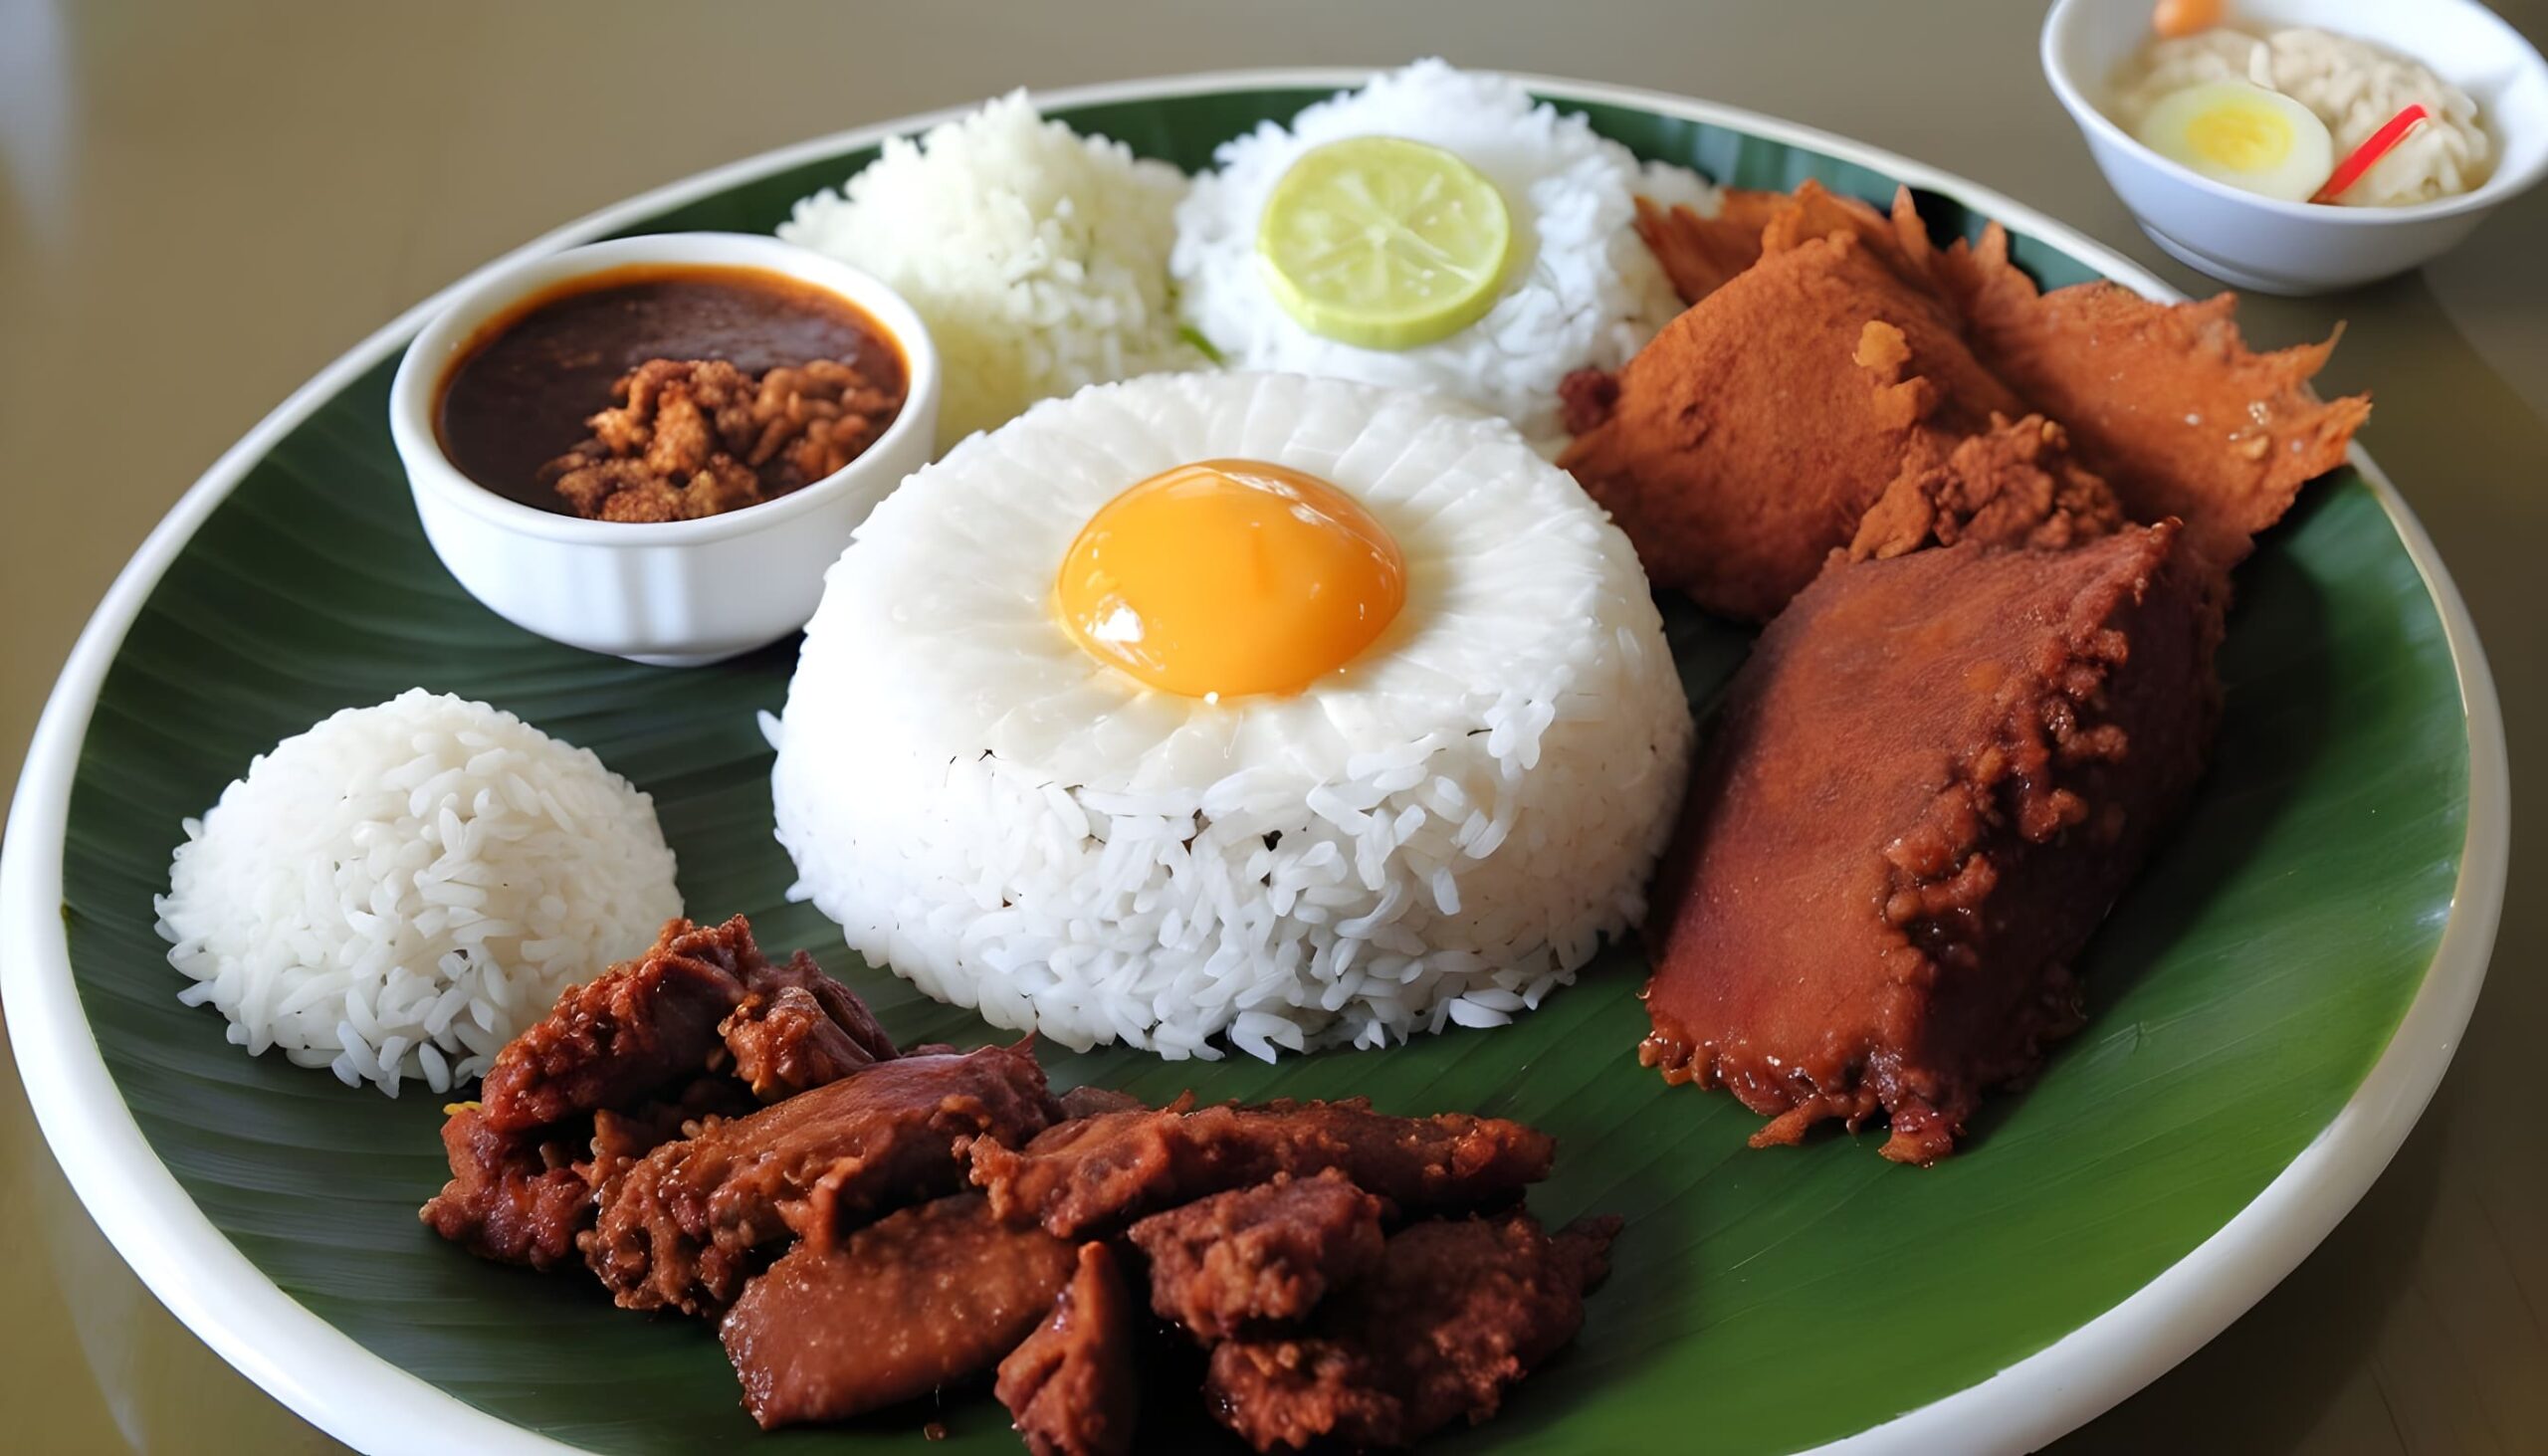 Why is Nasi Lemak Considered a Comfort Food in Malaysia?